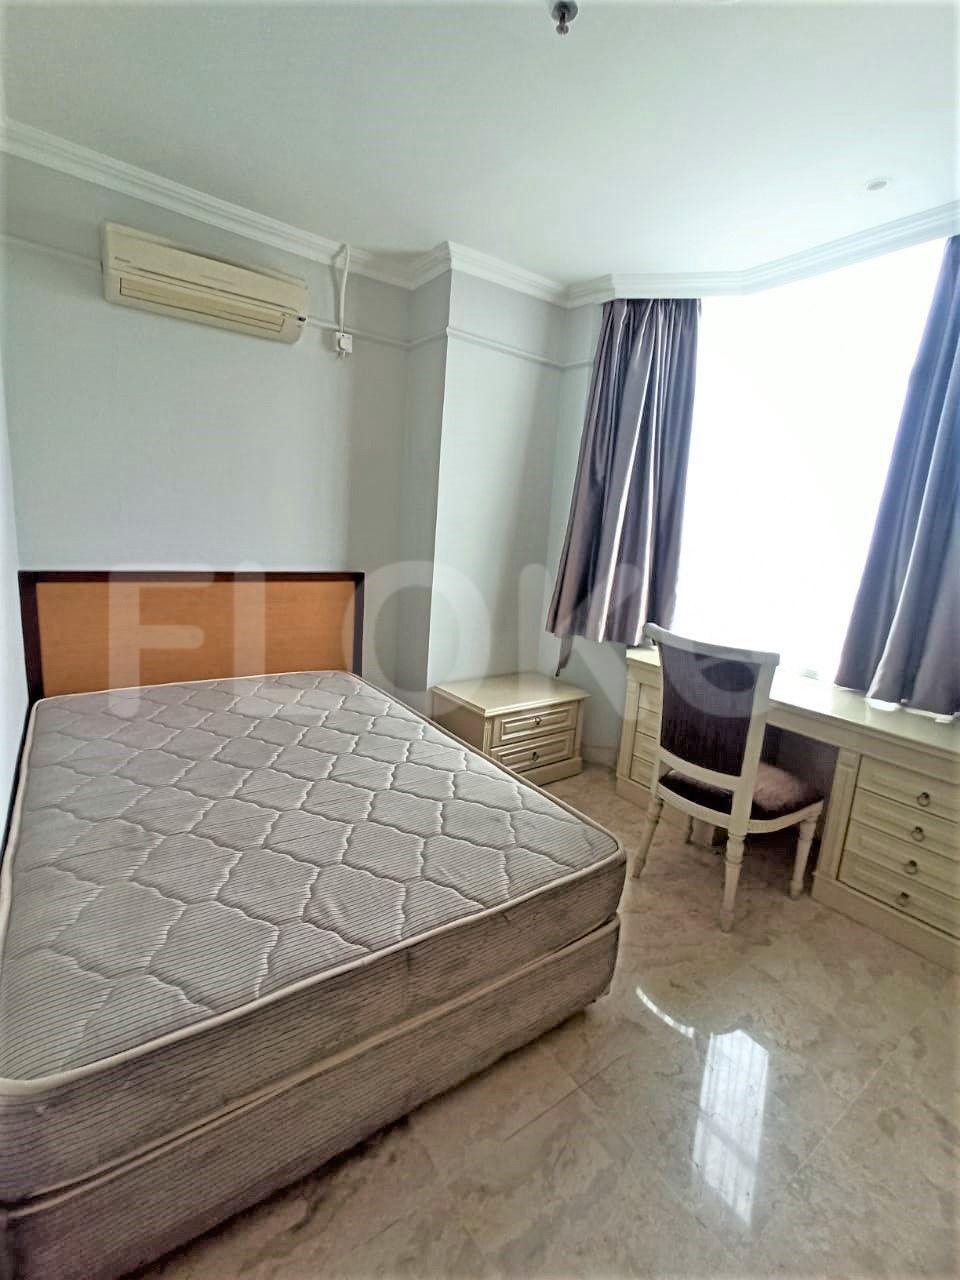 2 Bedroom on 15th Floor ftb42a for Rent in Parama Apartment